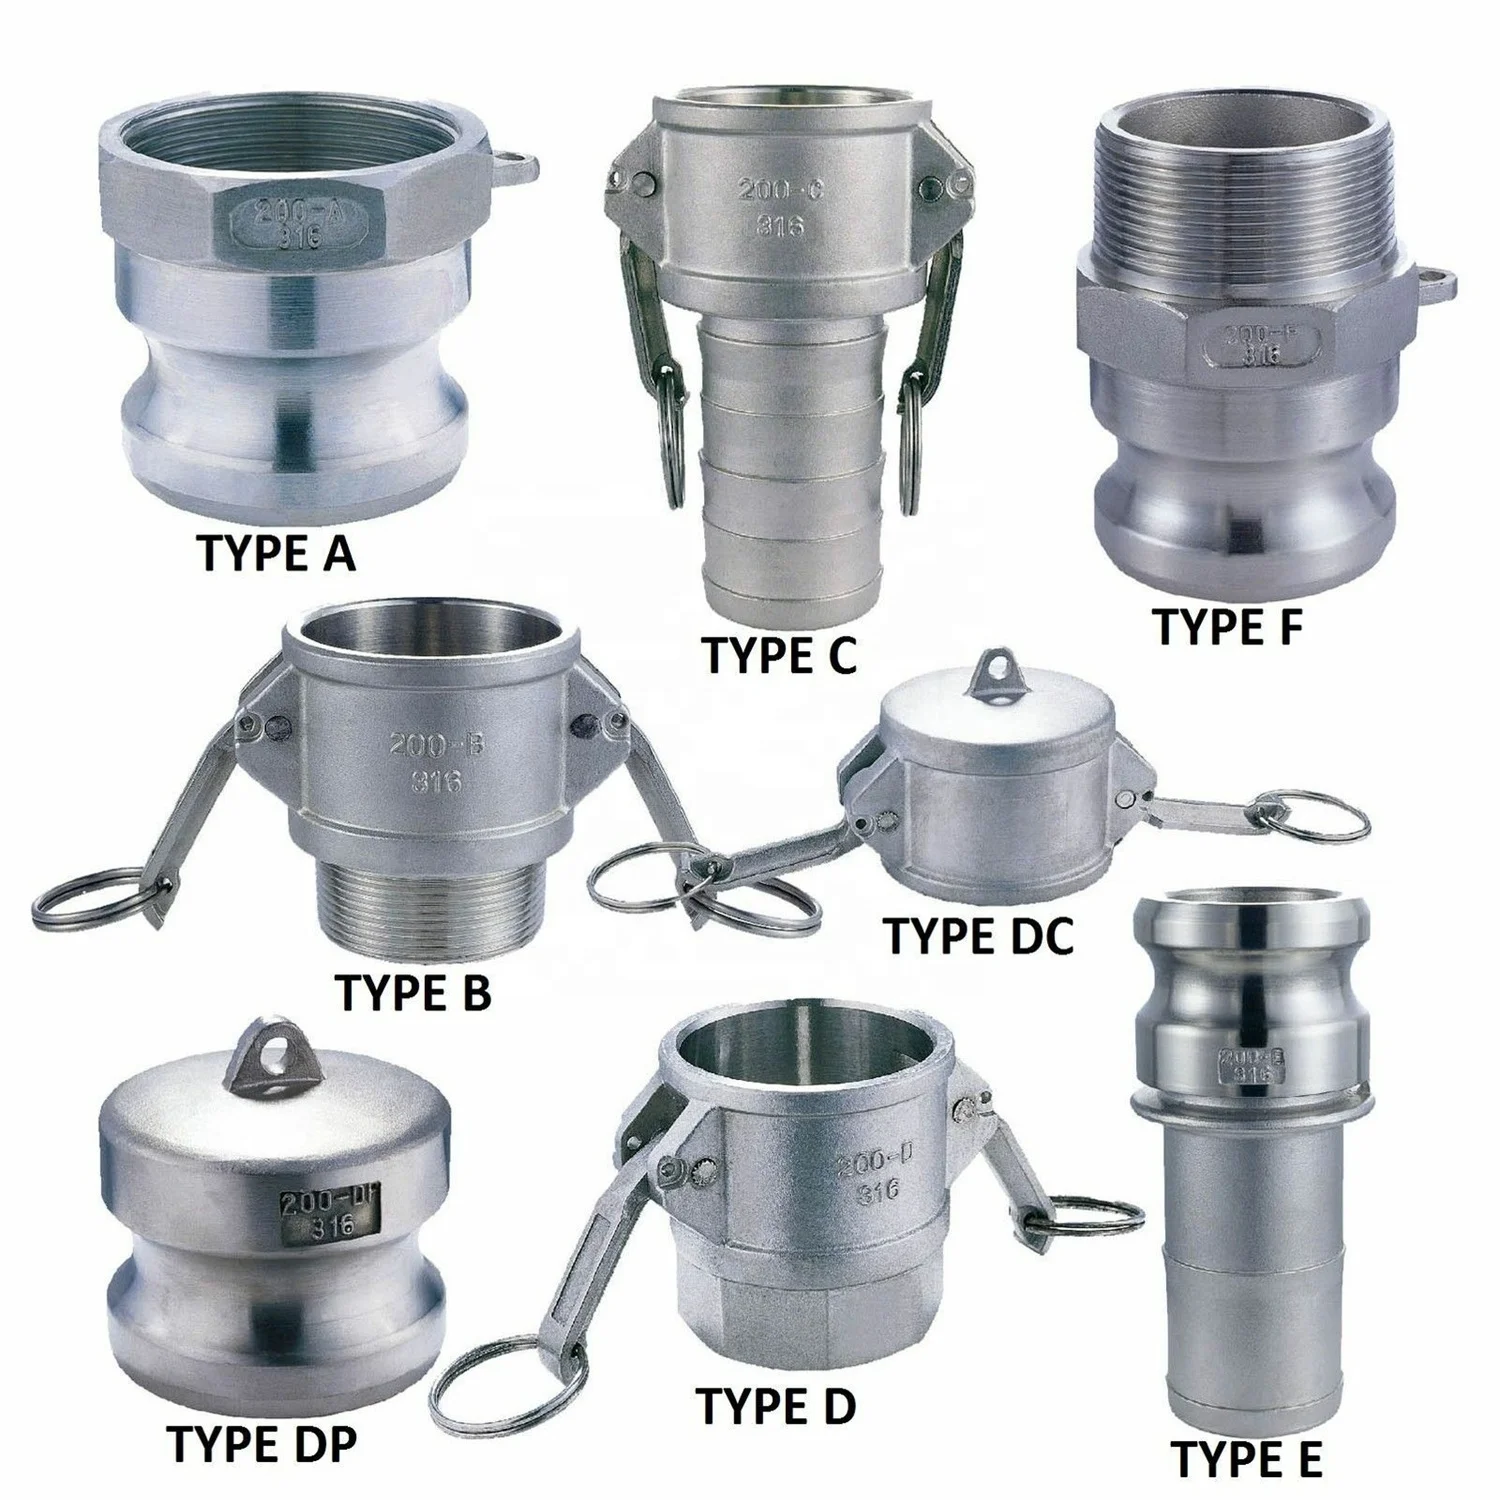 

Hot sale quality and low price all type stainless steel camlock quick coupling camlock fittings, Sliver